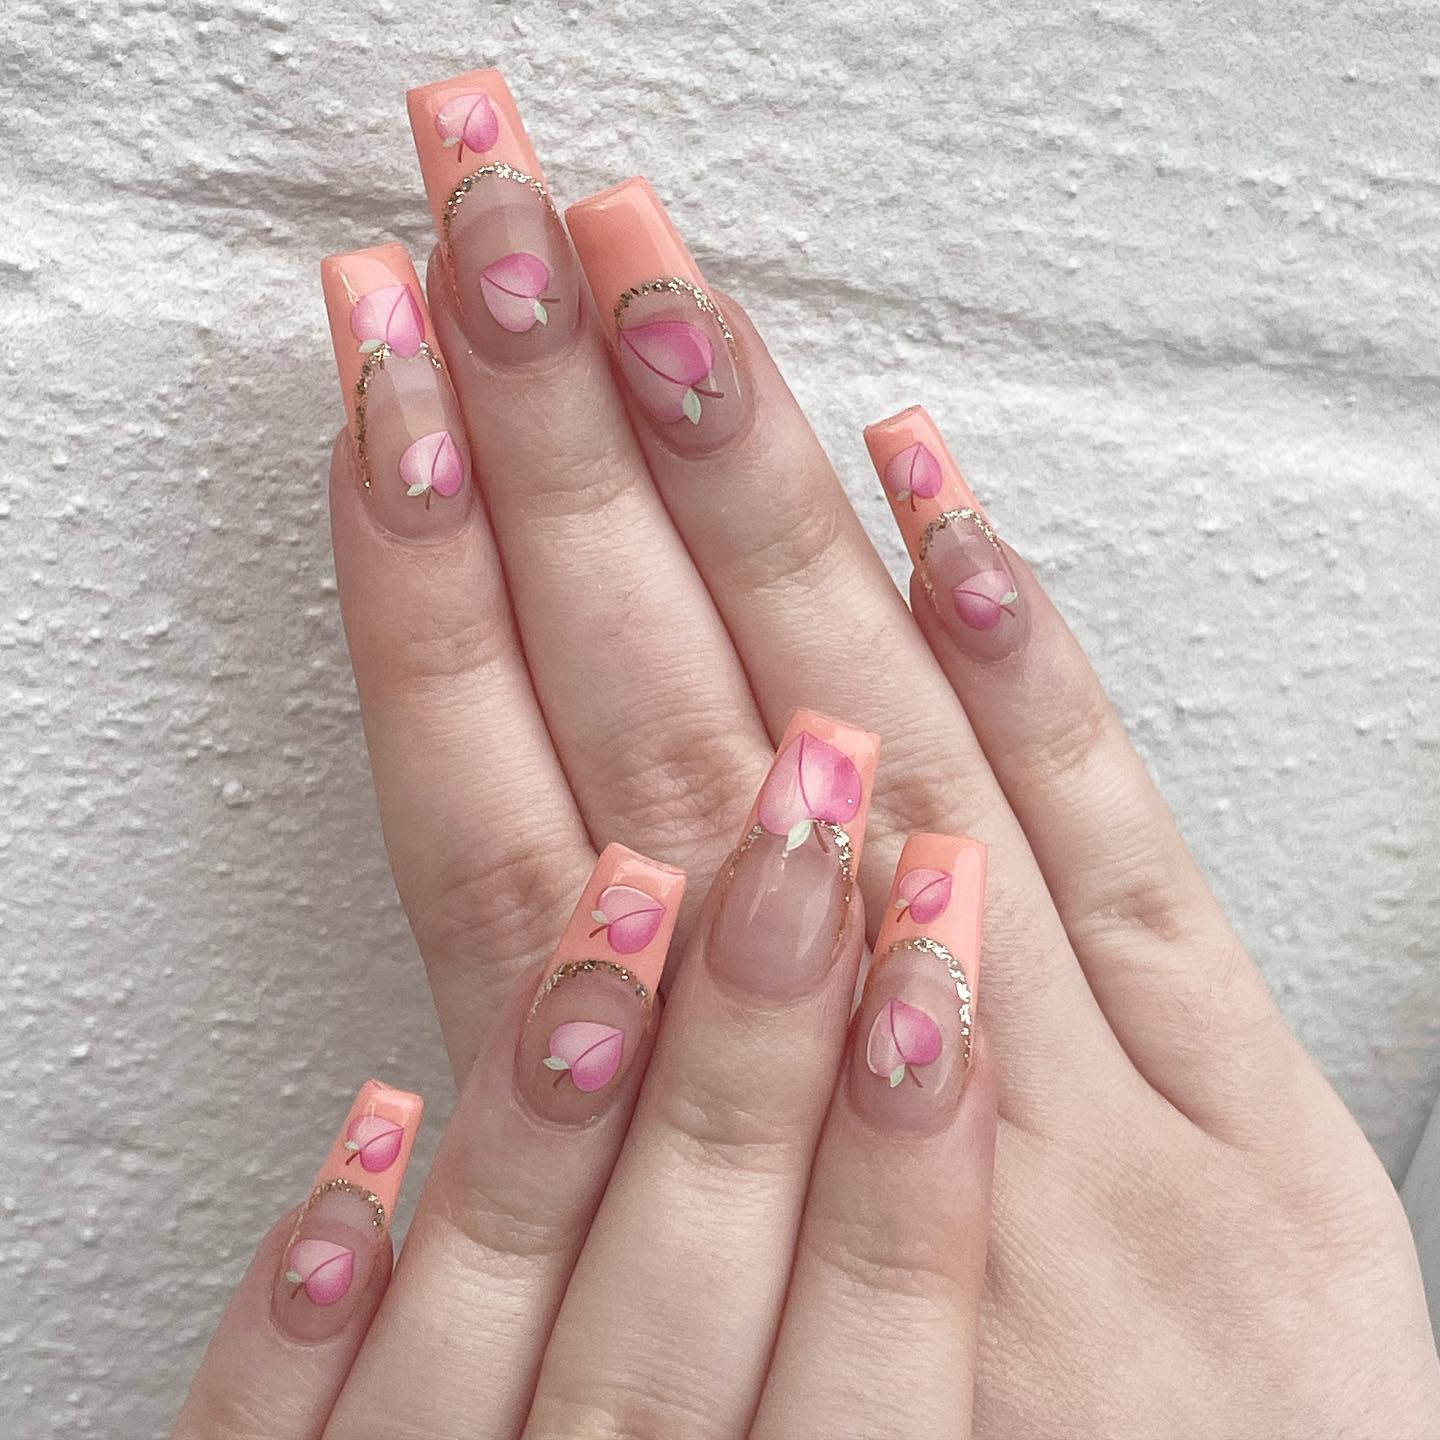 Peachy lovers, come here. With light peach french tips, your cute stickers will rock.